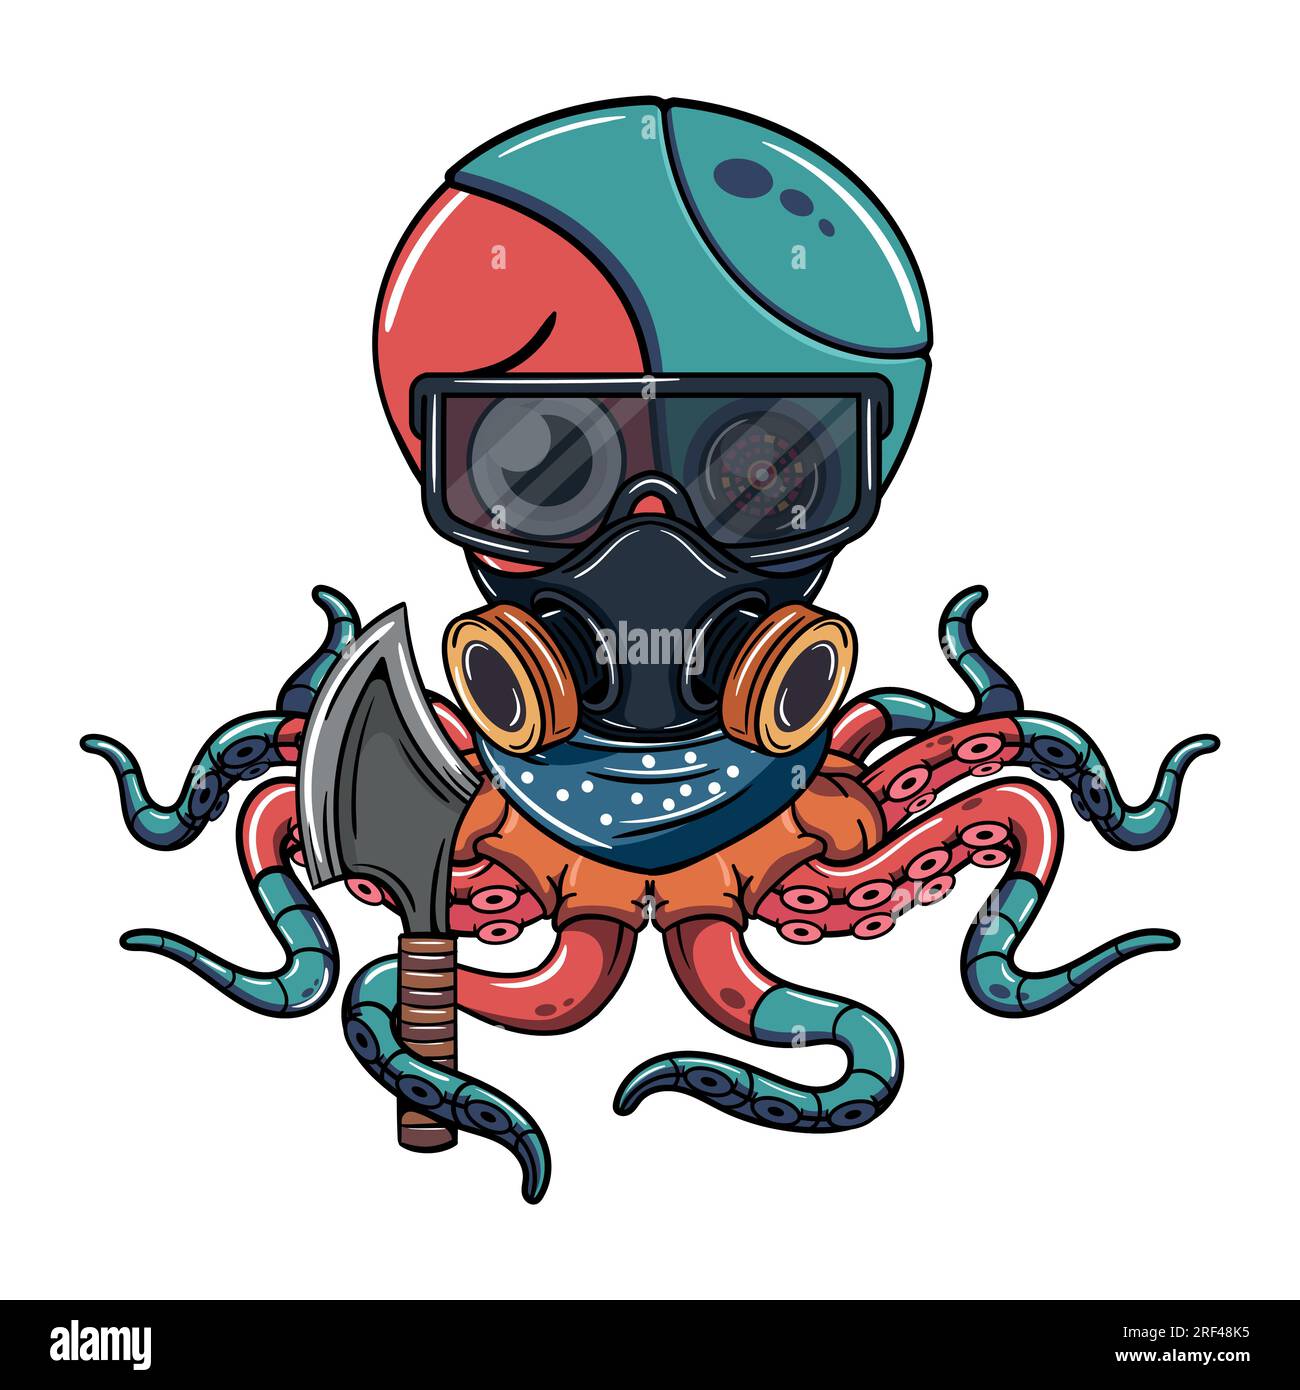 Cartoon cyborg octopus character with glasses, gas mask and an ax in his tentacle. Illustration for fantasy, science fiction and adventure comics Stock Vector